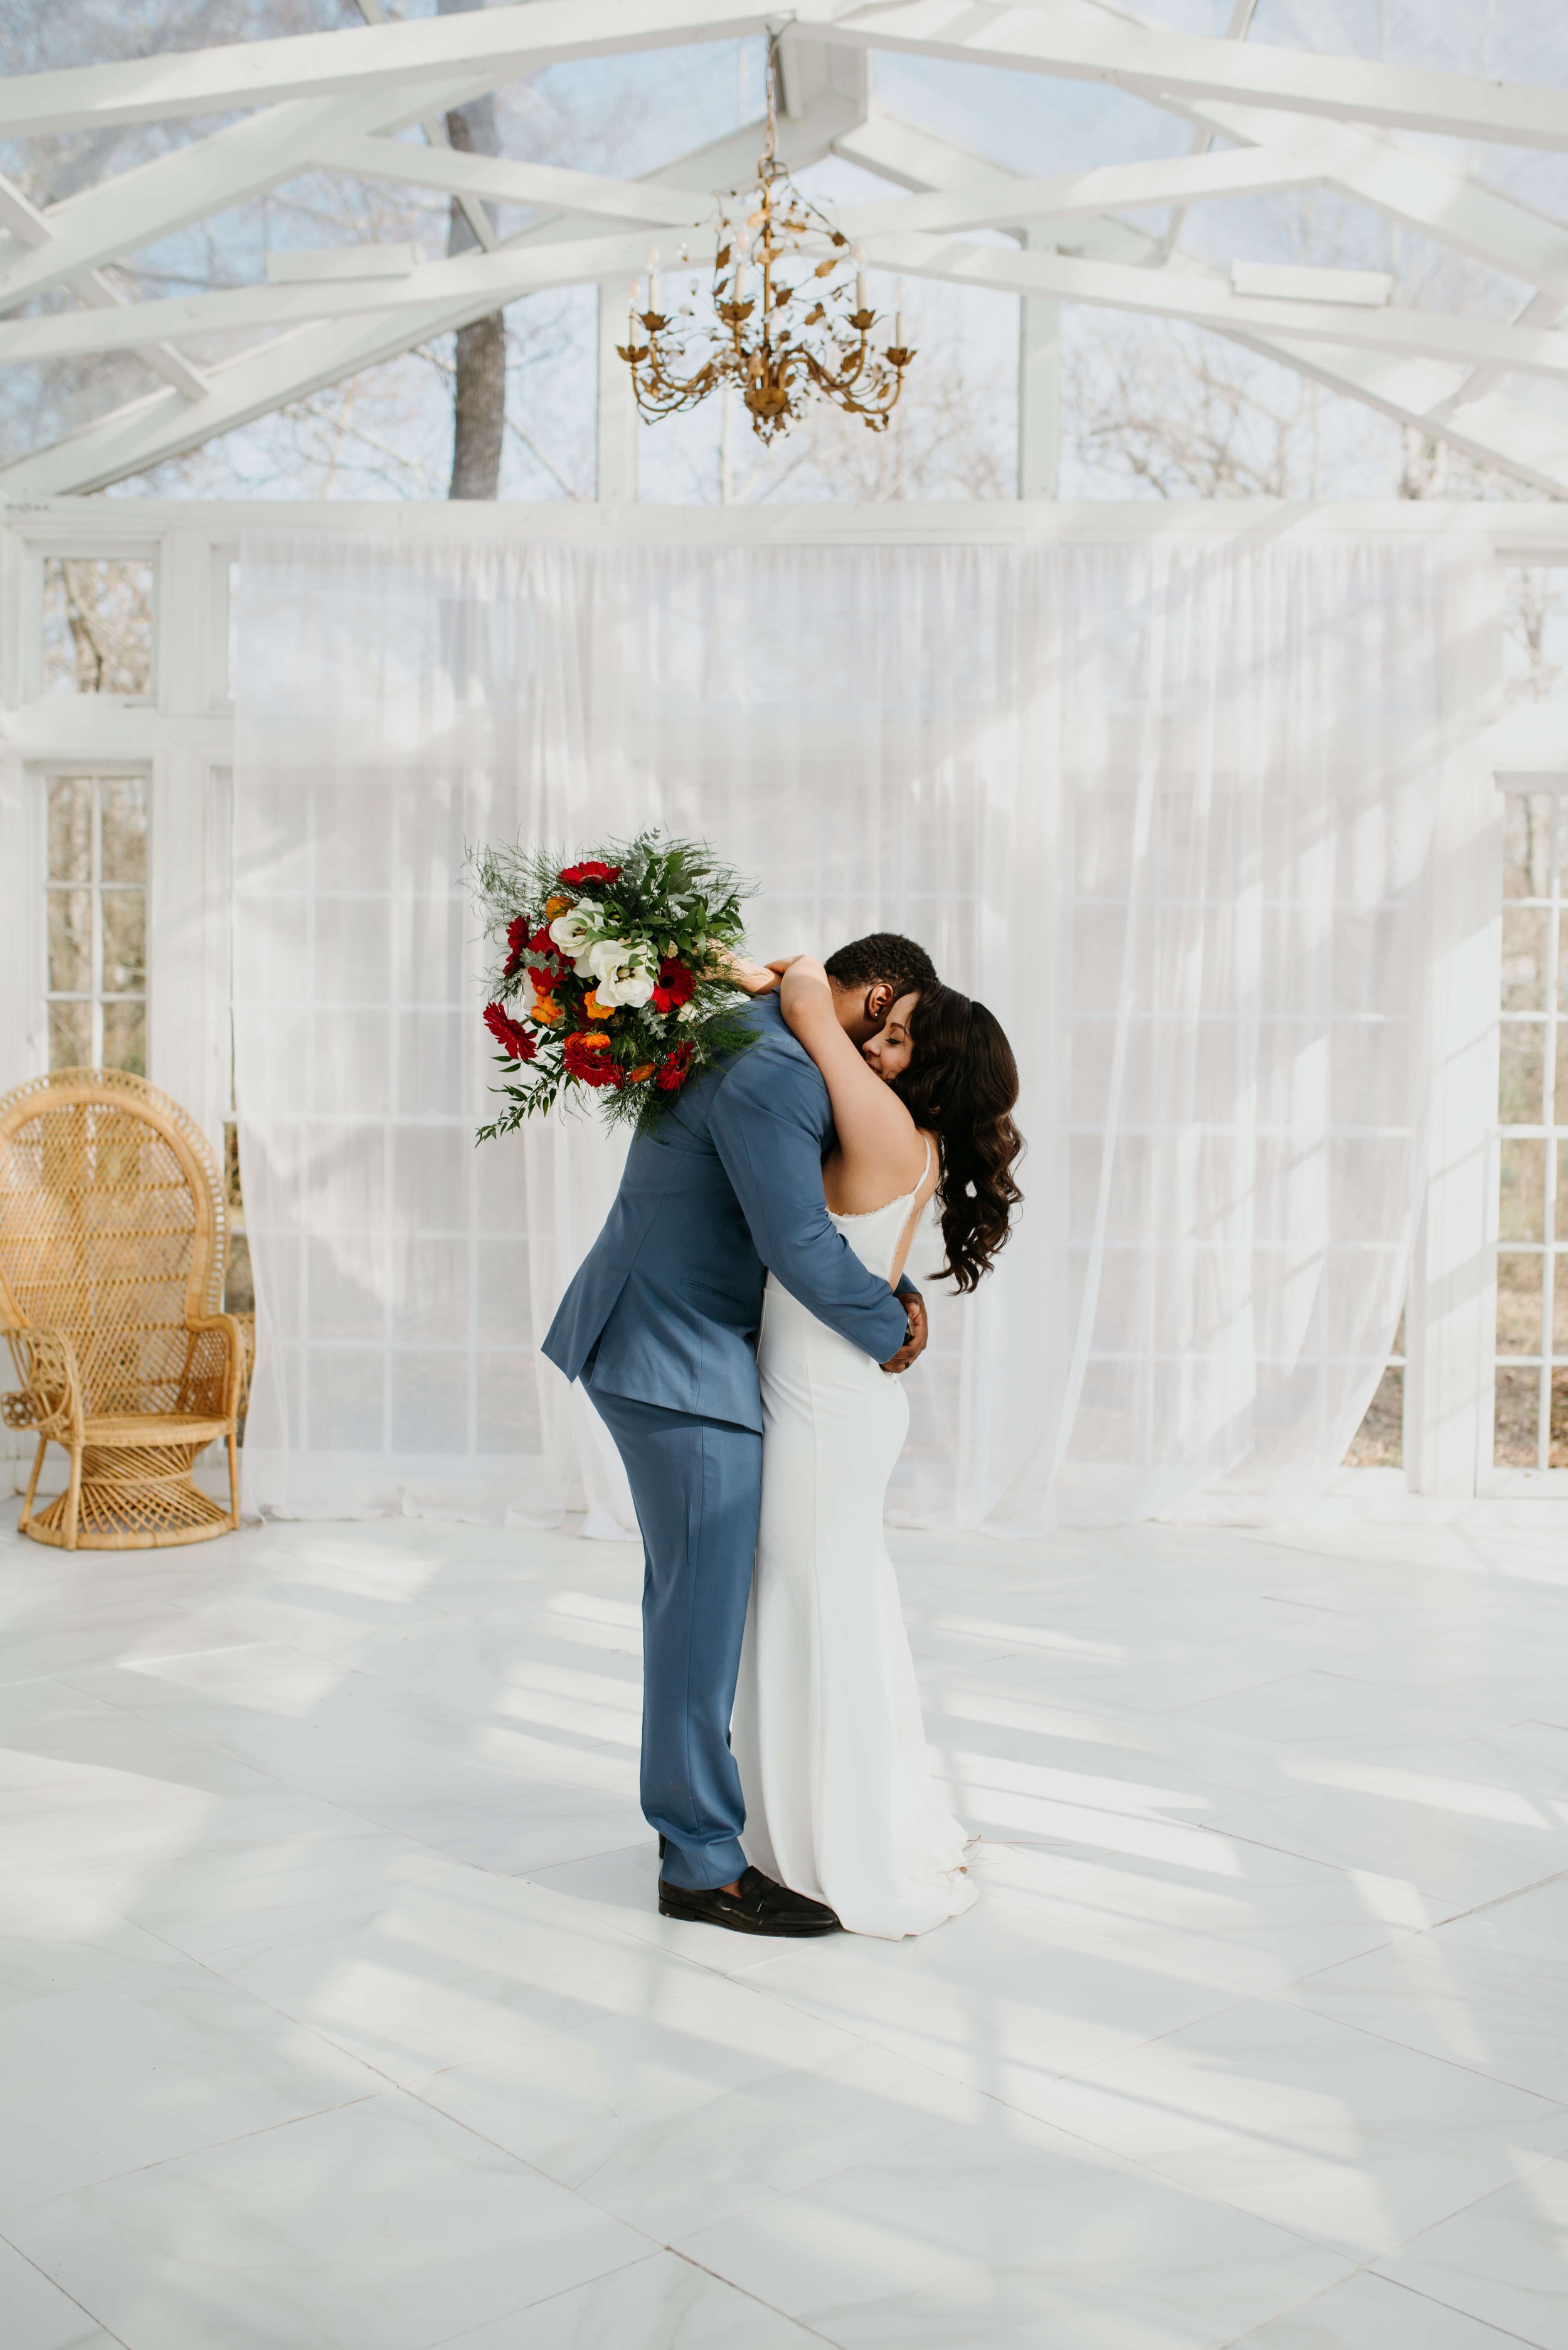 Houston Area Elopement at The Oak Atelier photographed by J. Andrade Visual Arts